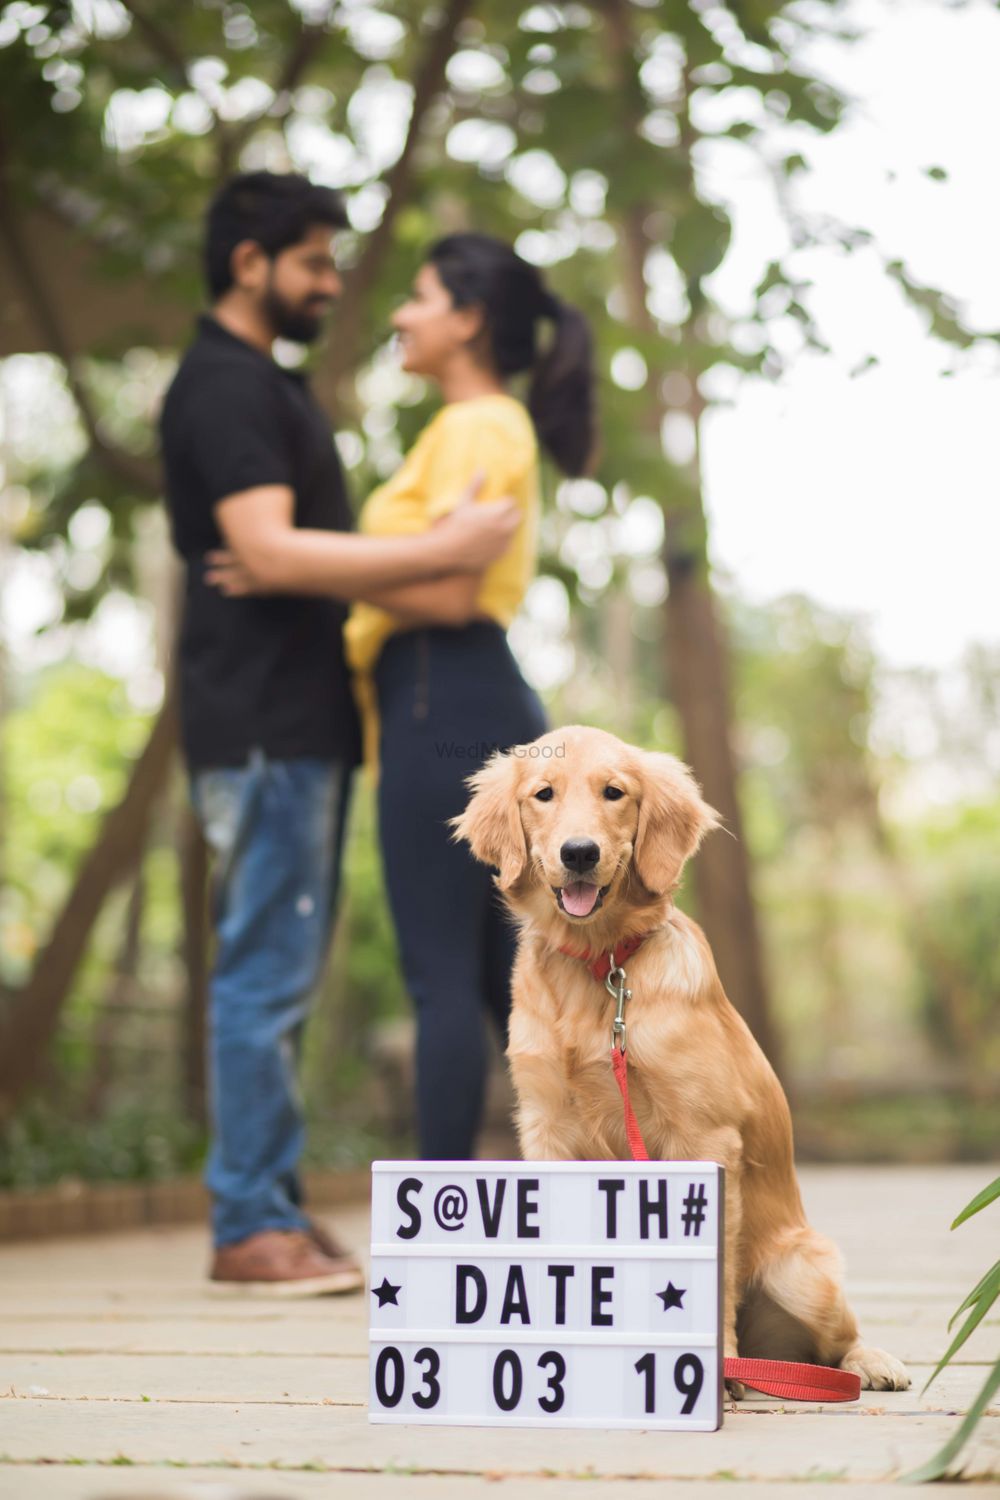 Photo of Save the date idea with dog and light box